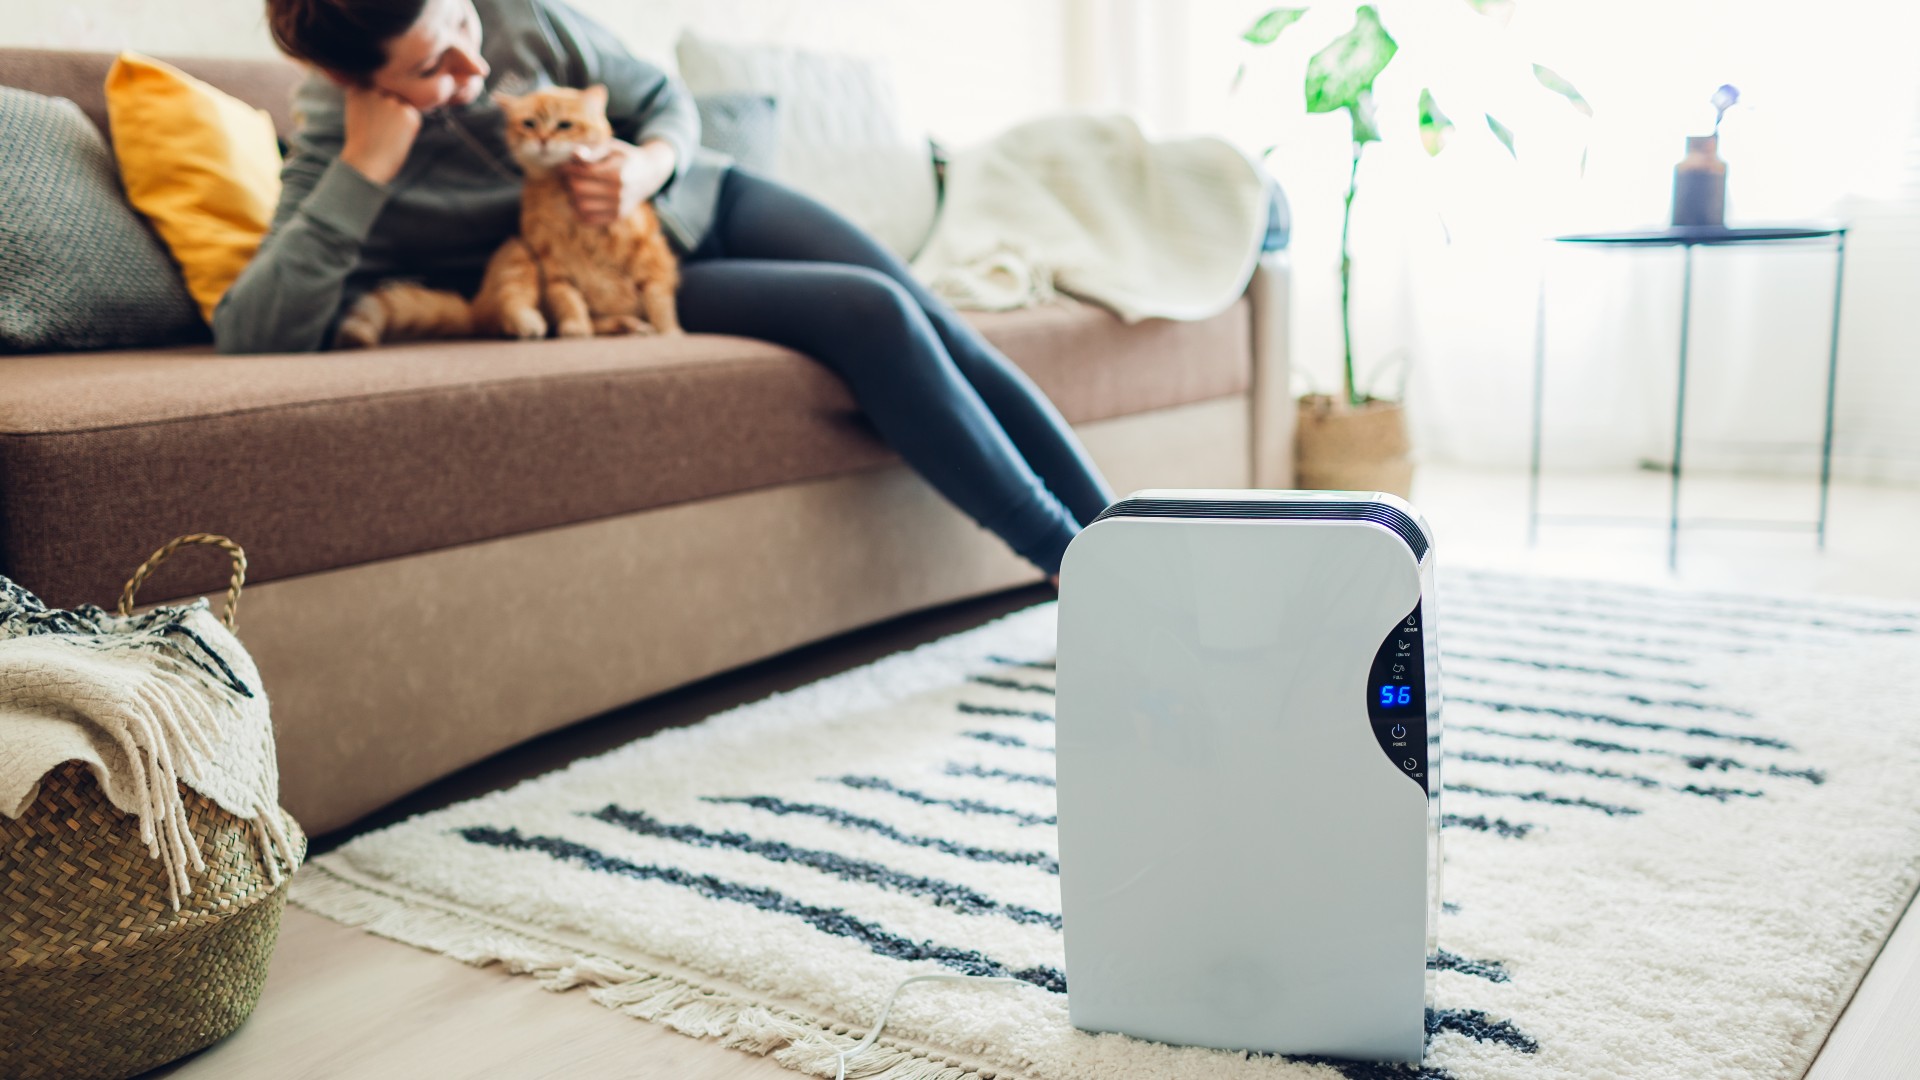 Close-up of dehumidifier in living room with woman and cat on the couch behind